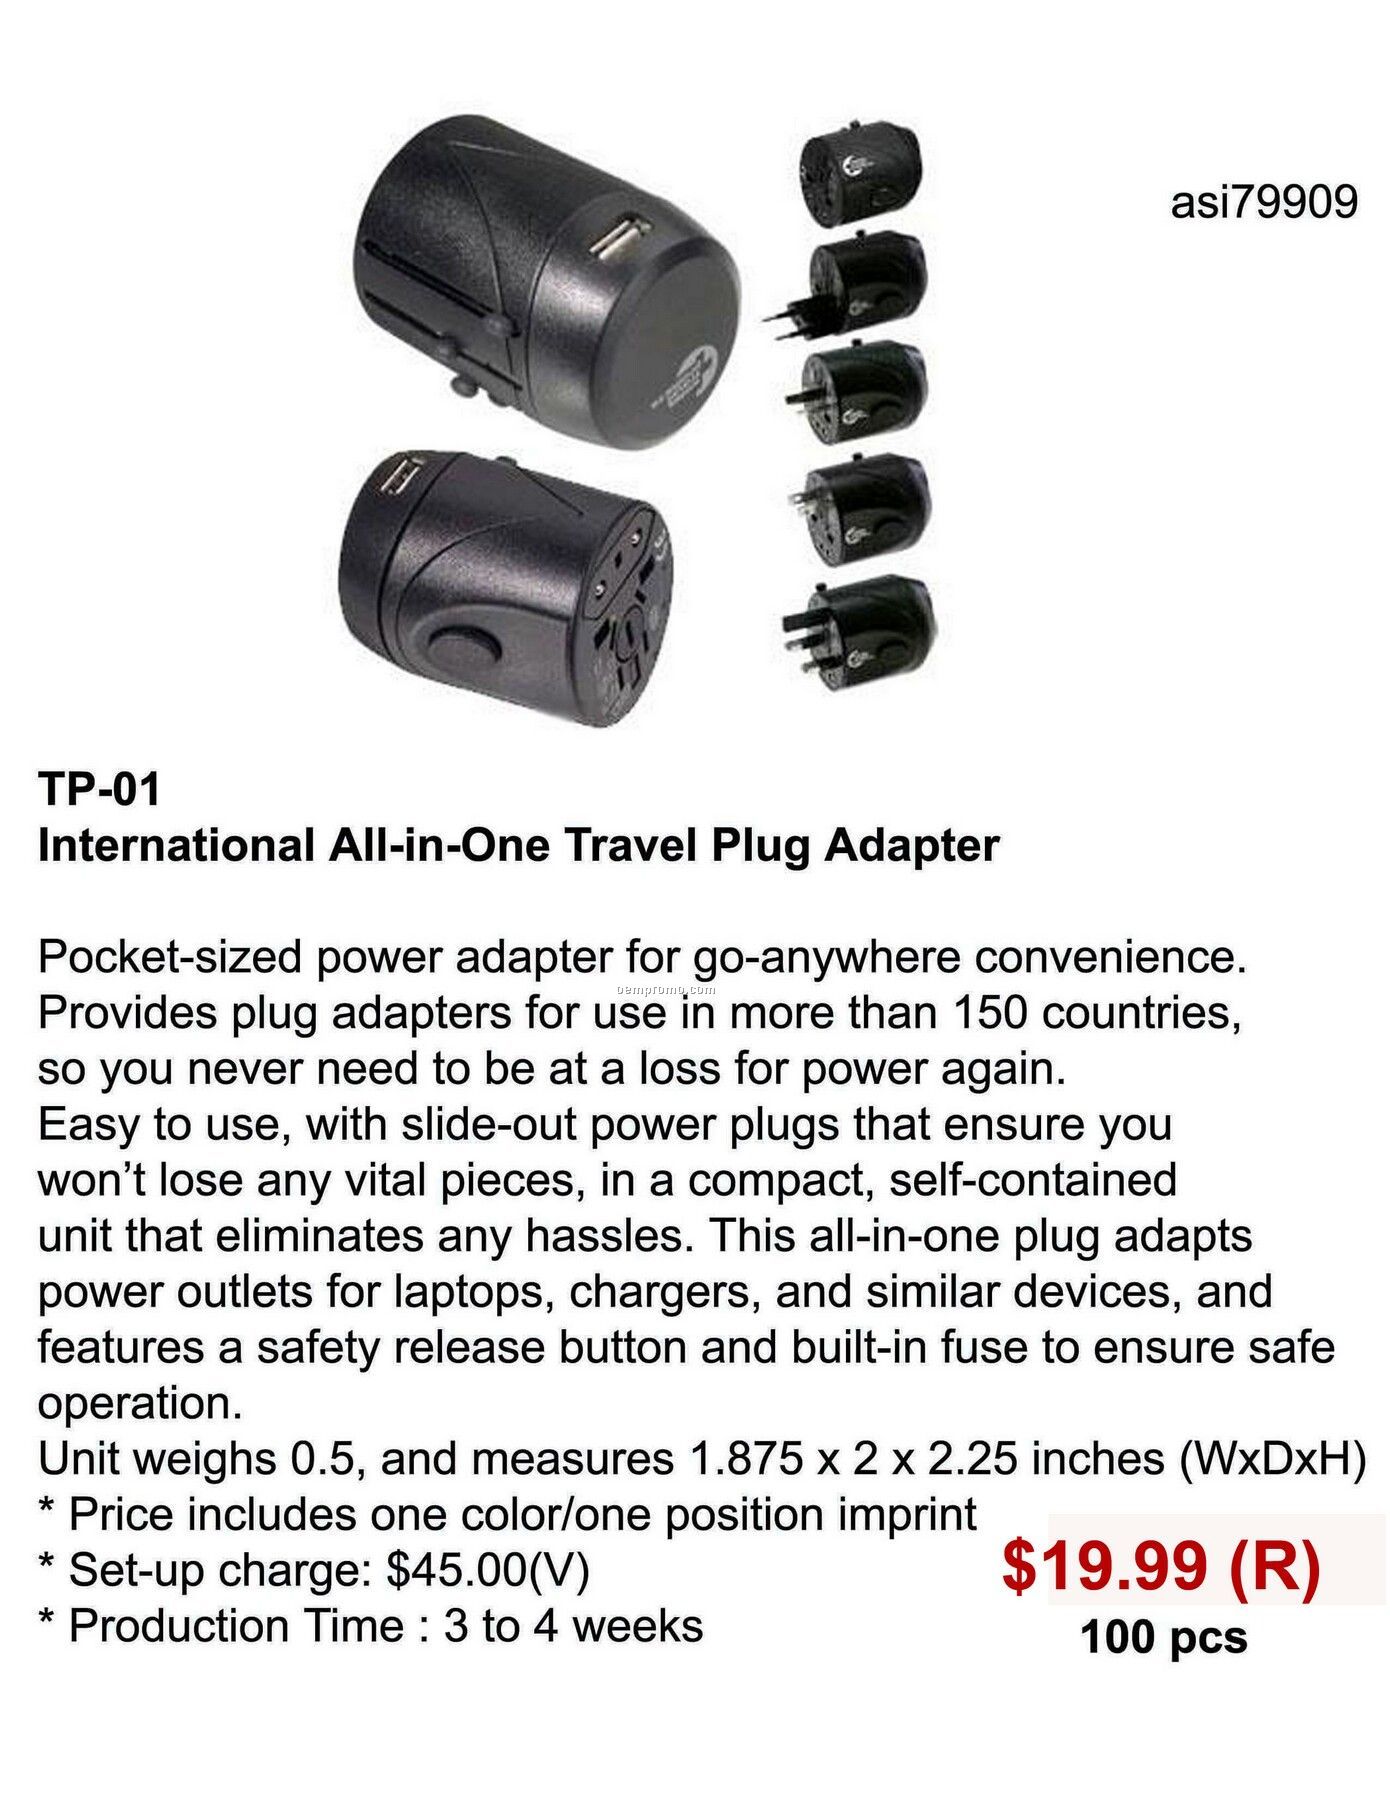 World Travel Plug Adapter For 150 Countries